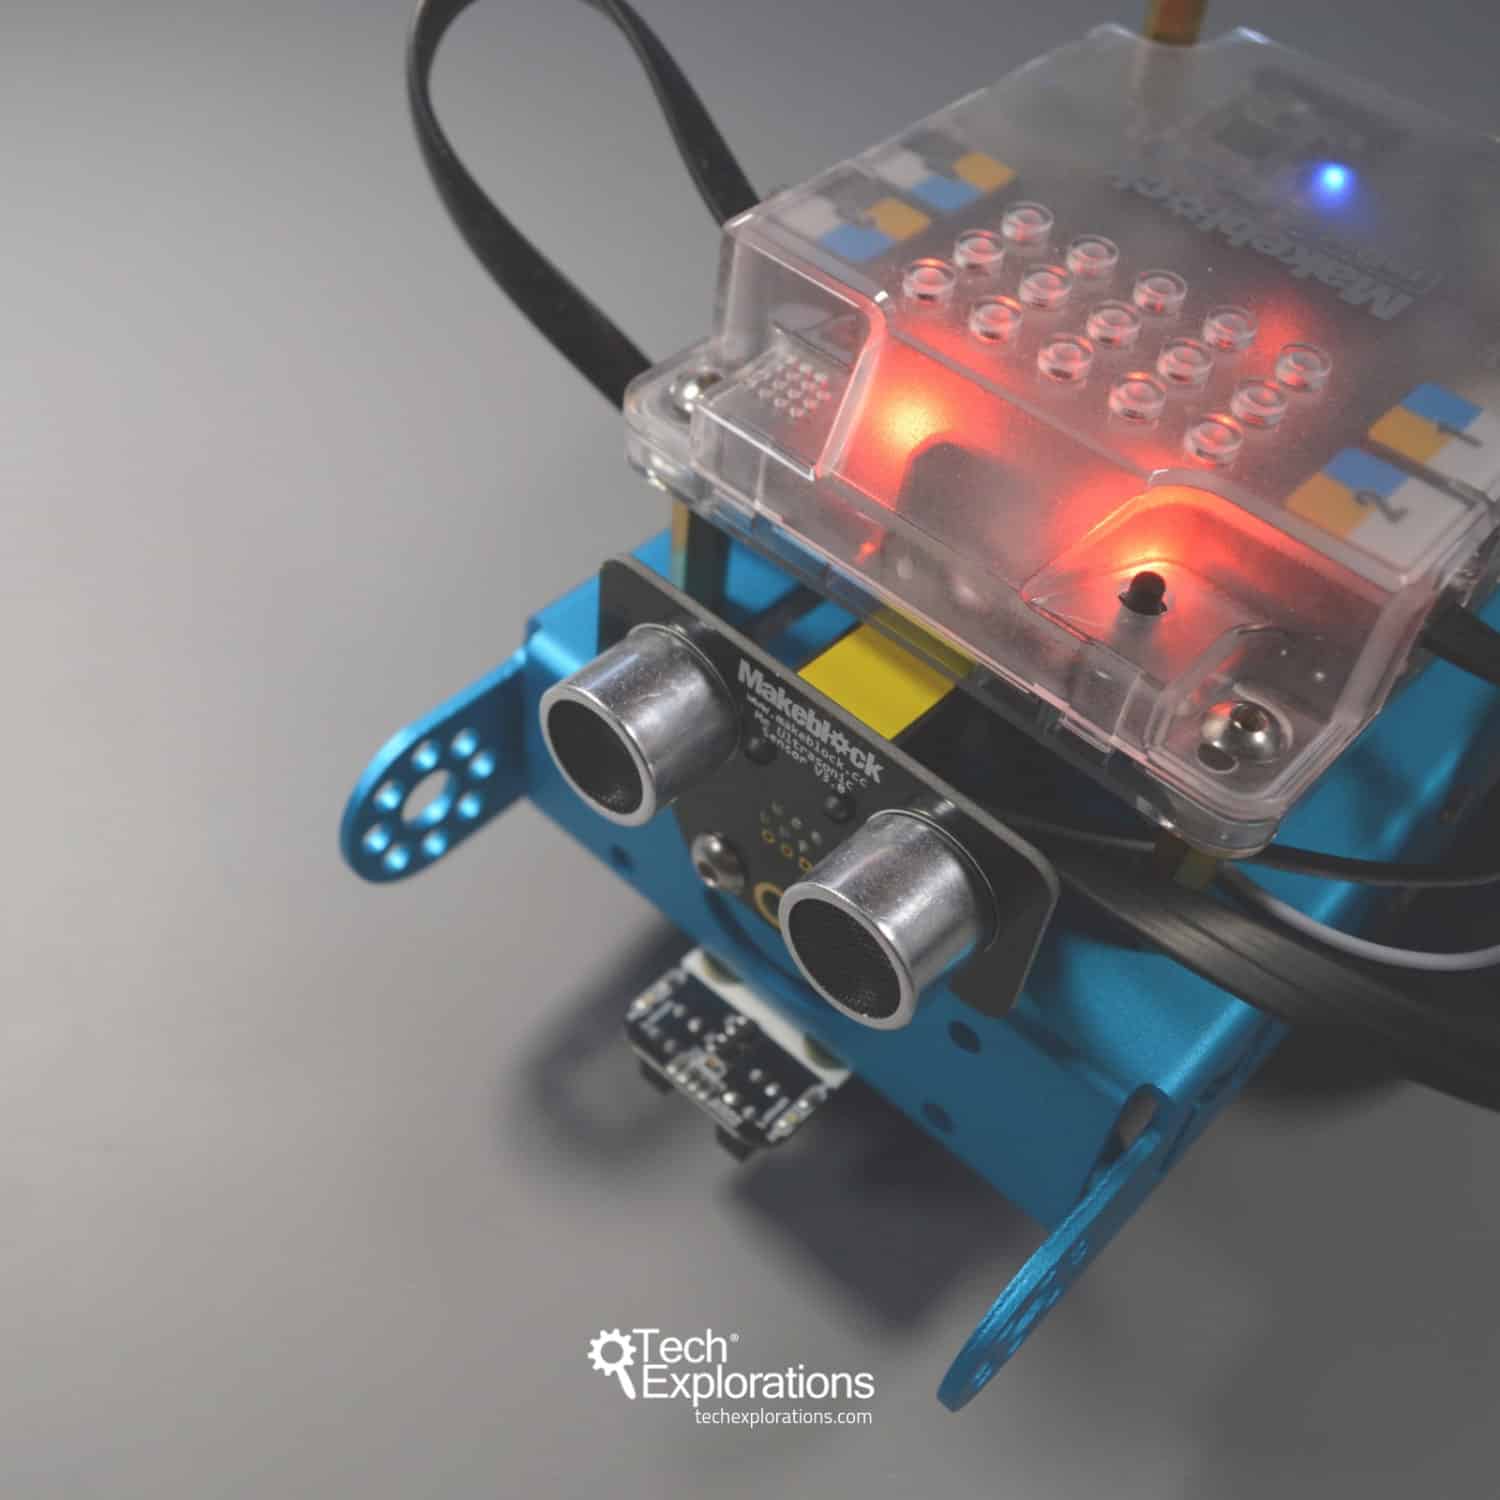 Learn with Tech Explorations, Arduino with the mbot